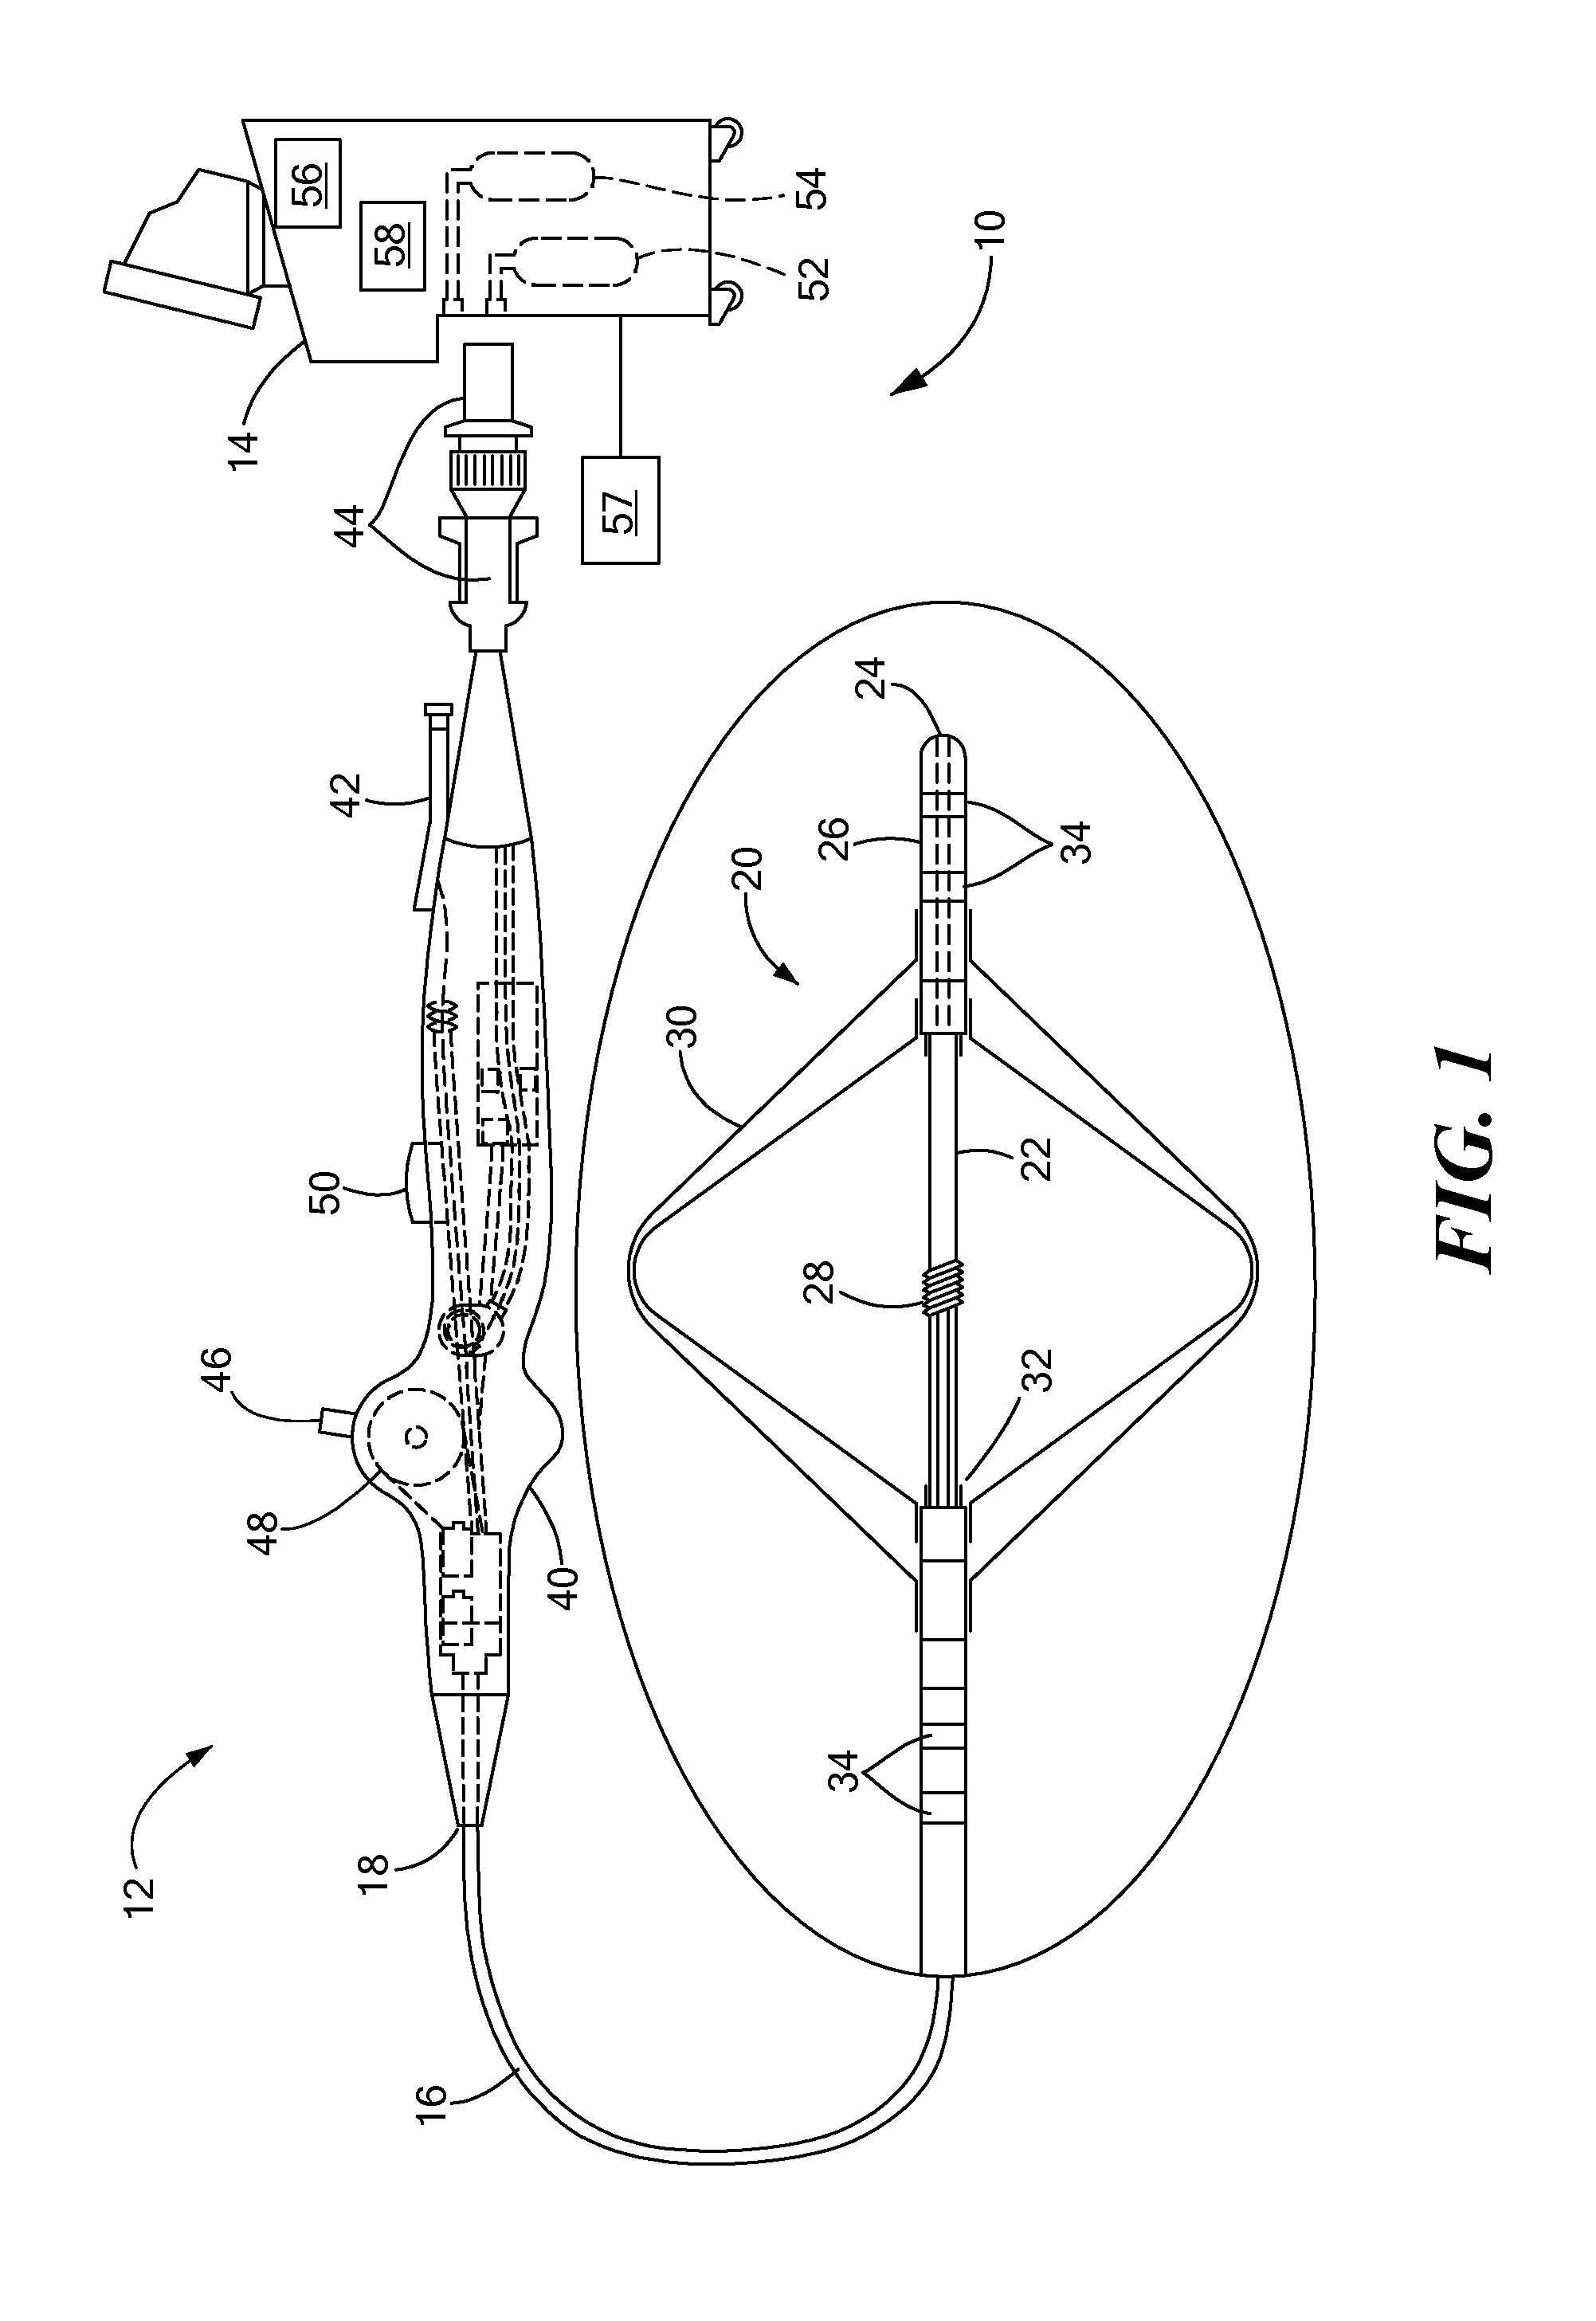 Systems and methods for detecting tissue contact during ablation